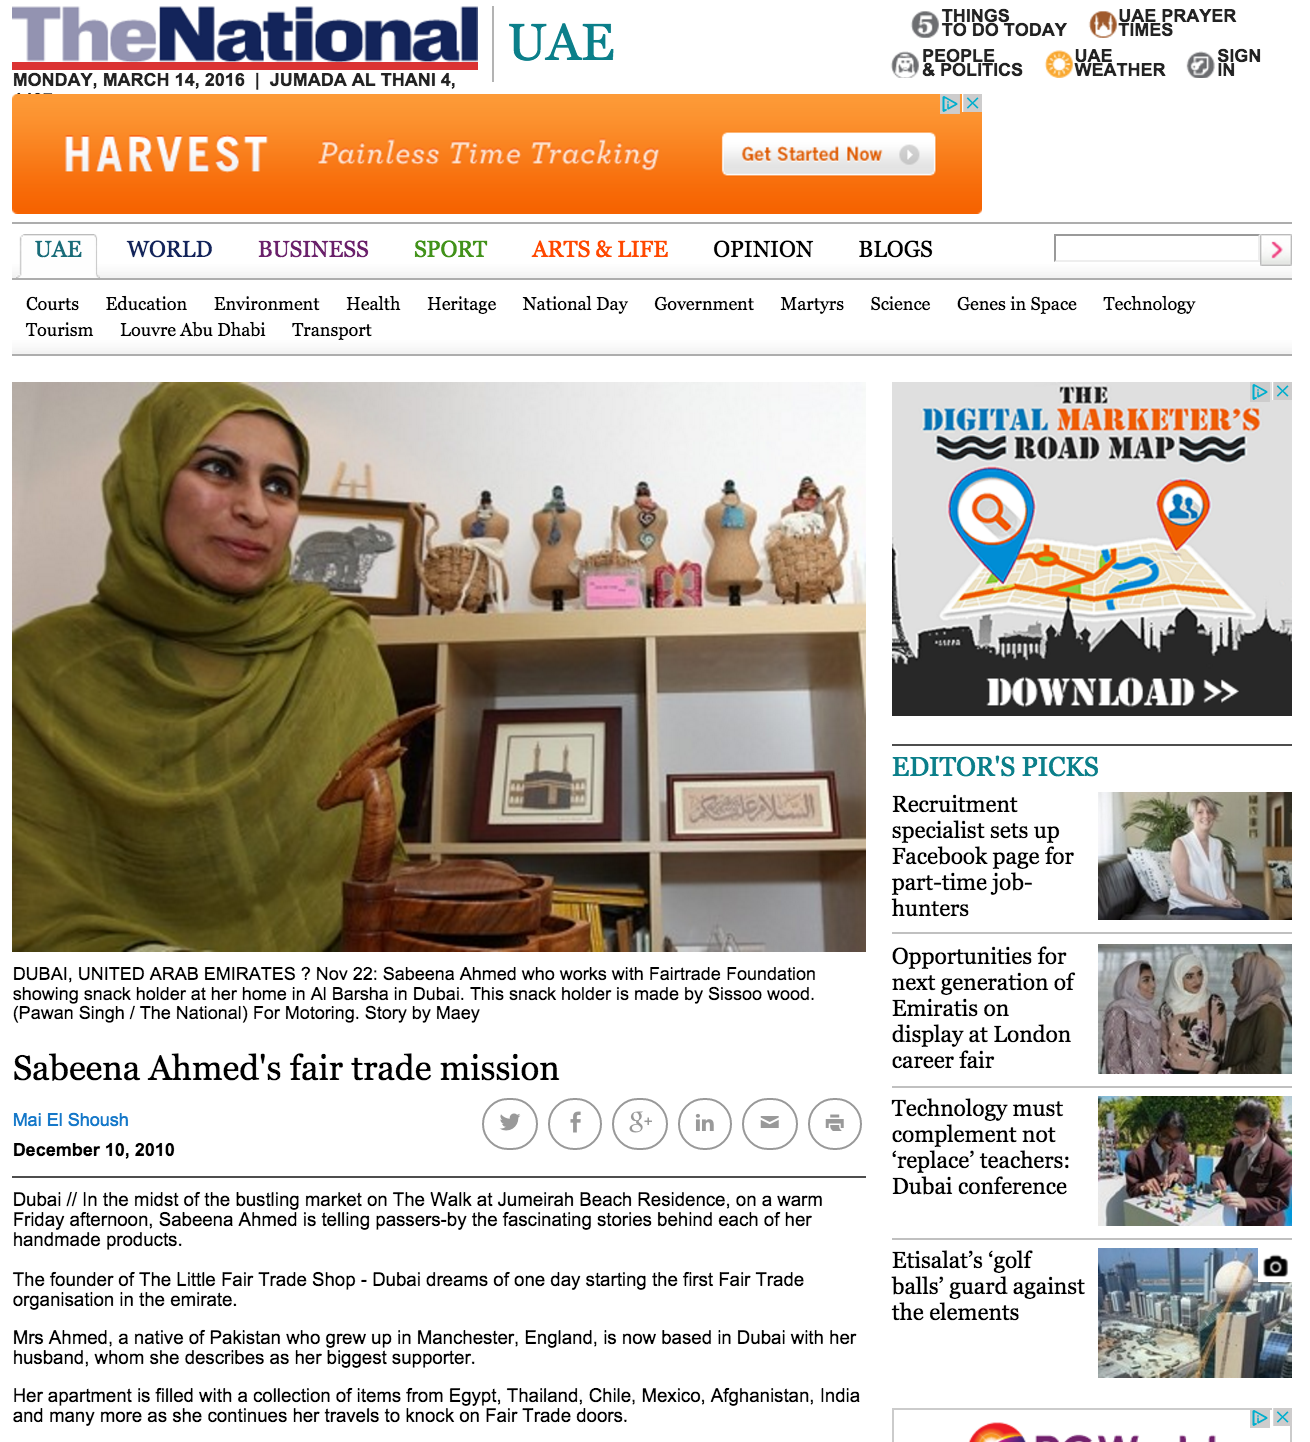 Sabeena Ahmed's fair trade mission